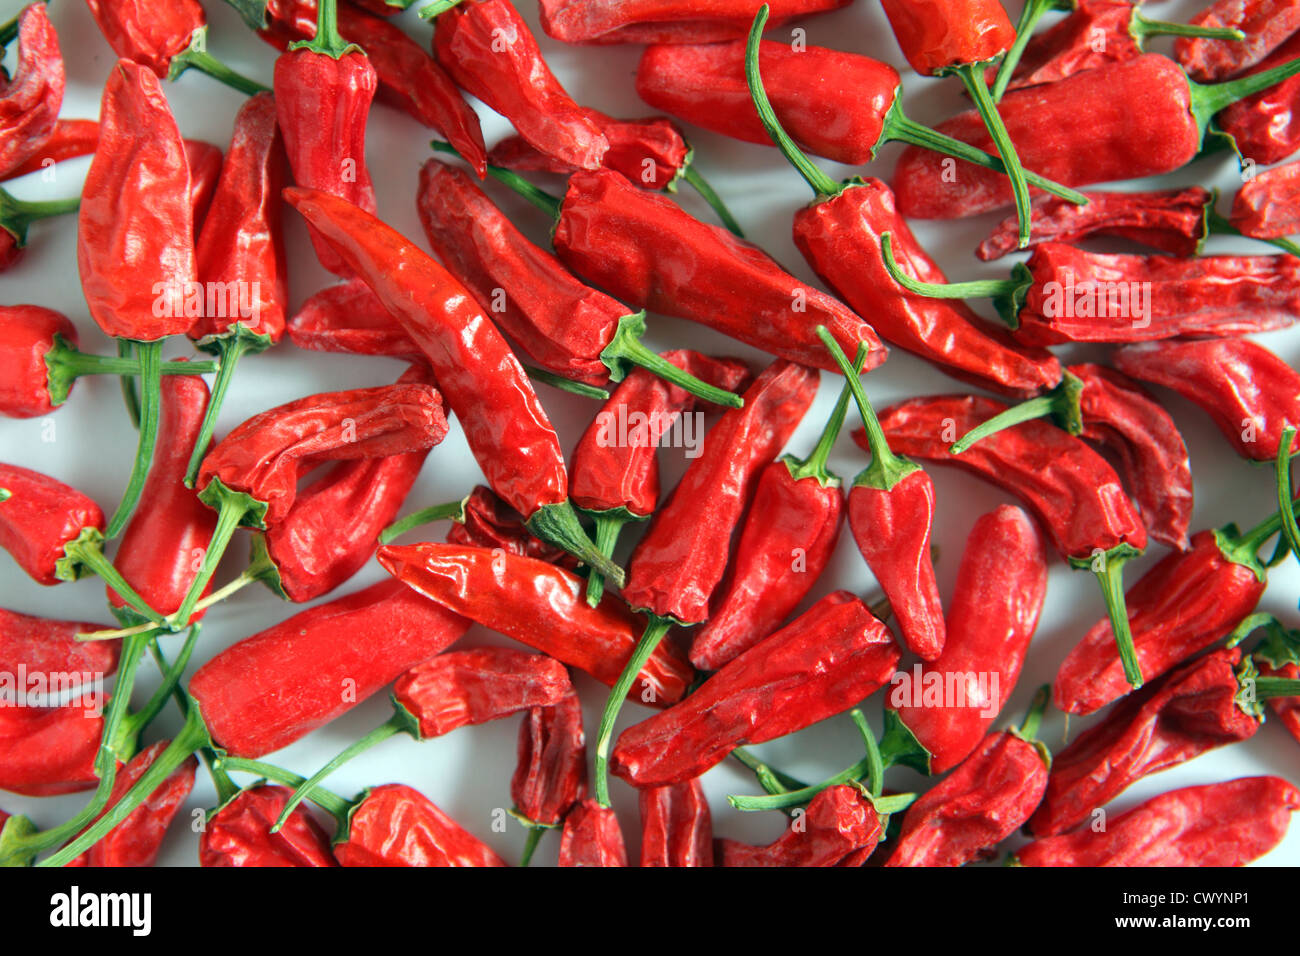 Dry dried red Chili peppers, food stuff, spice ingredient, cooking, health, hot, repetition, studio image, UK Stock Photo